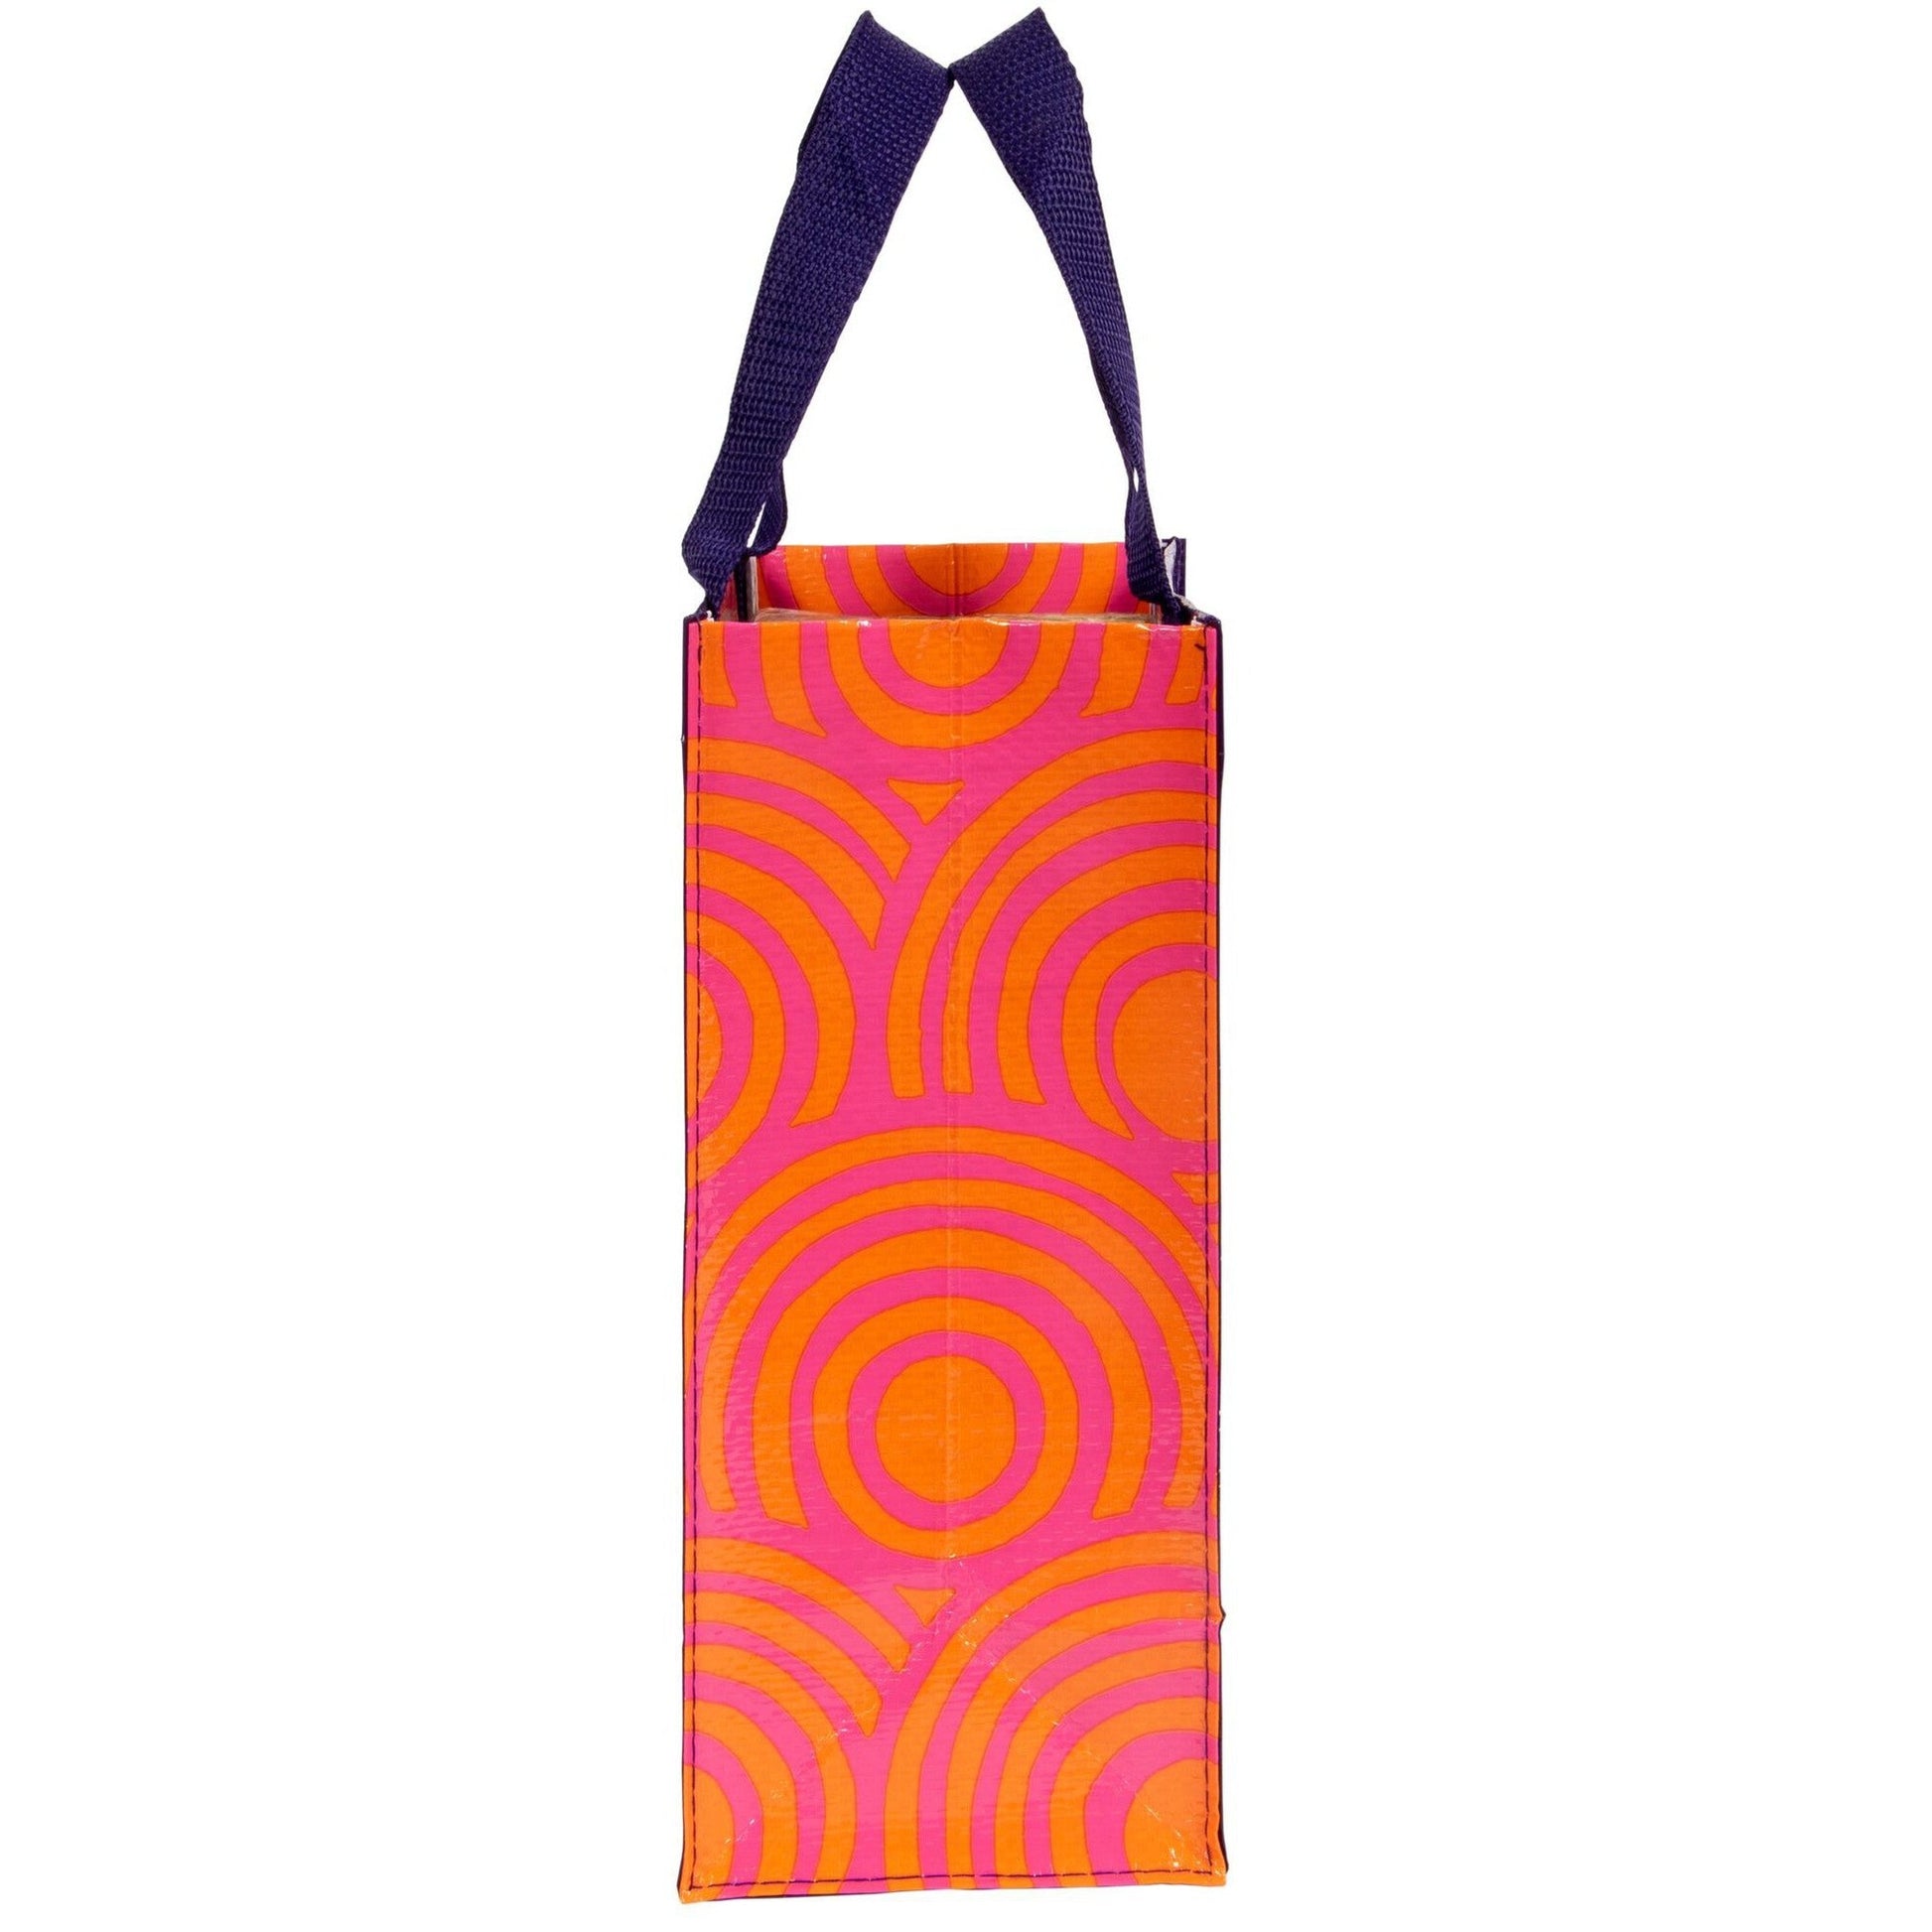 Munchies Handy Tote Bag | Reusable Eco-Friendly Lunch Gift Bag | 10" x 8.5"